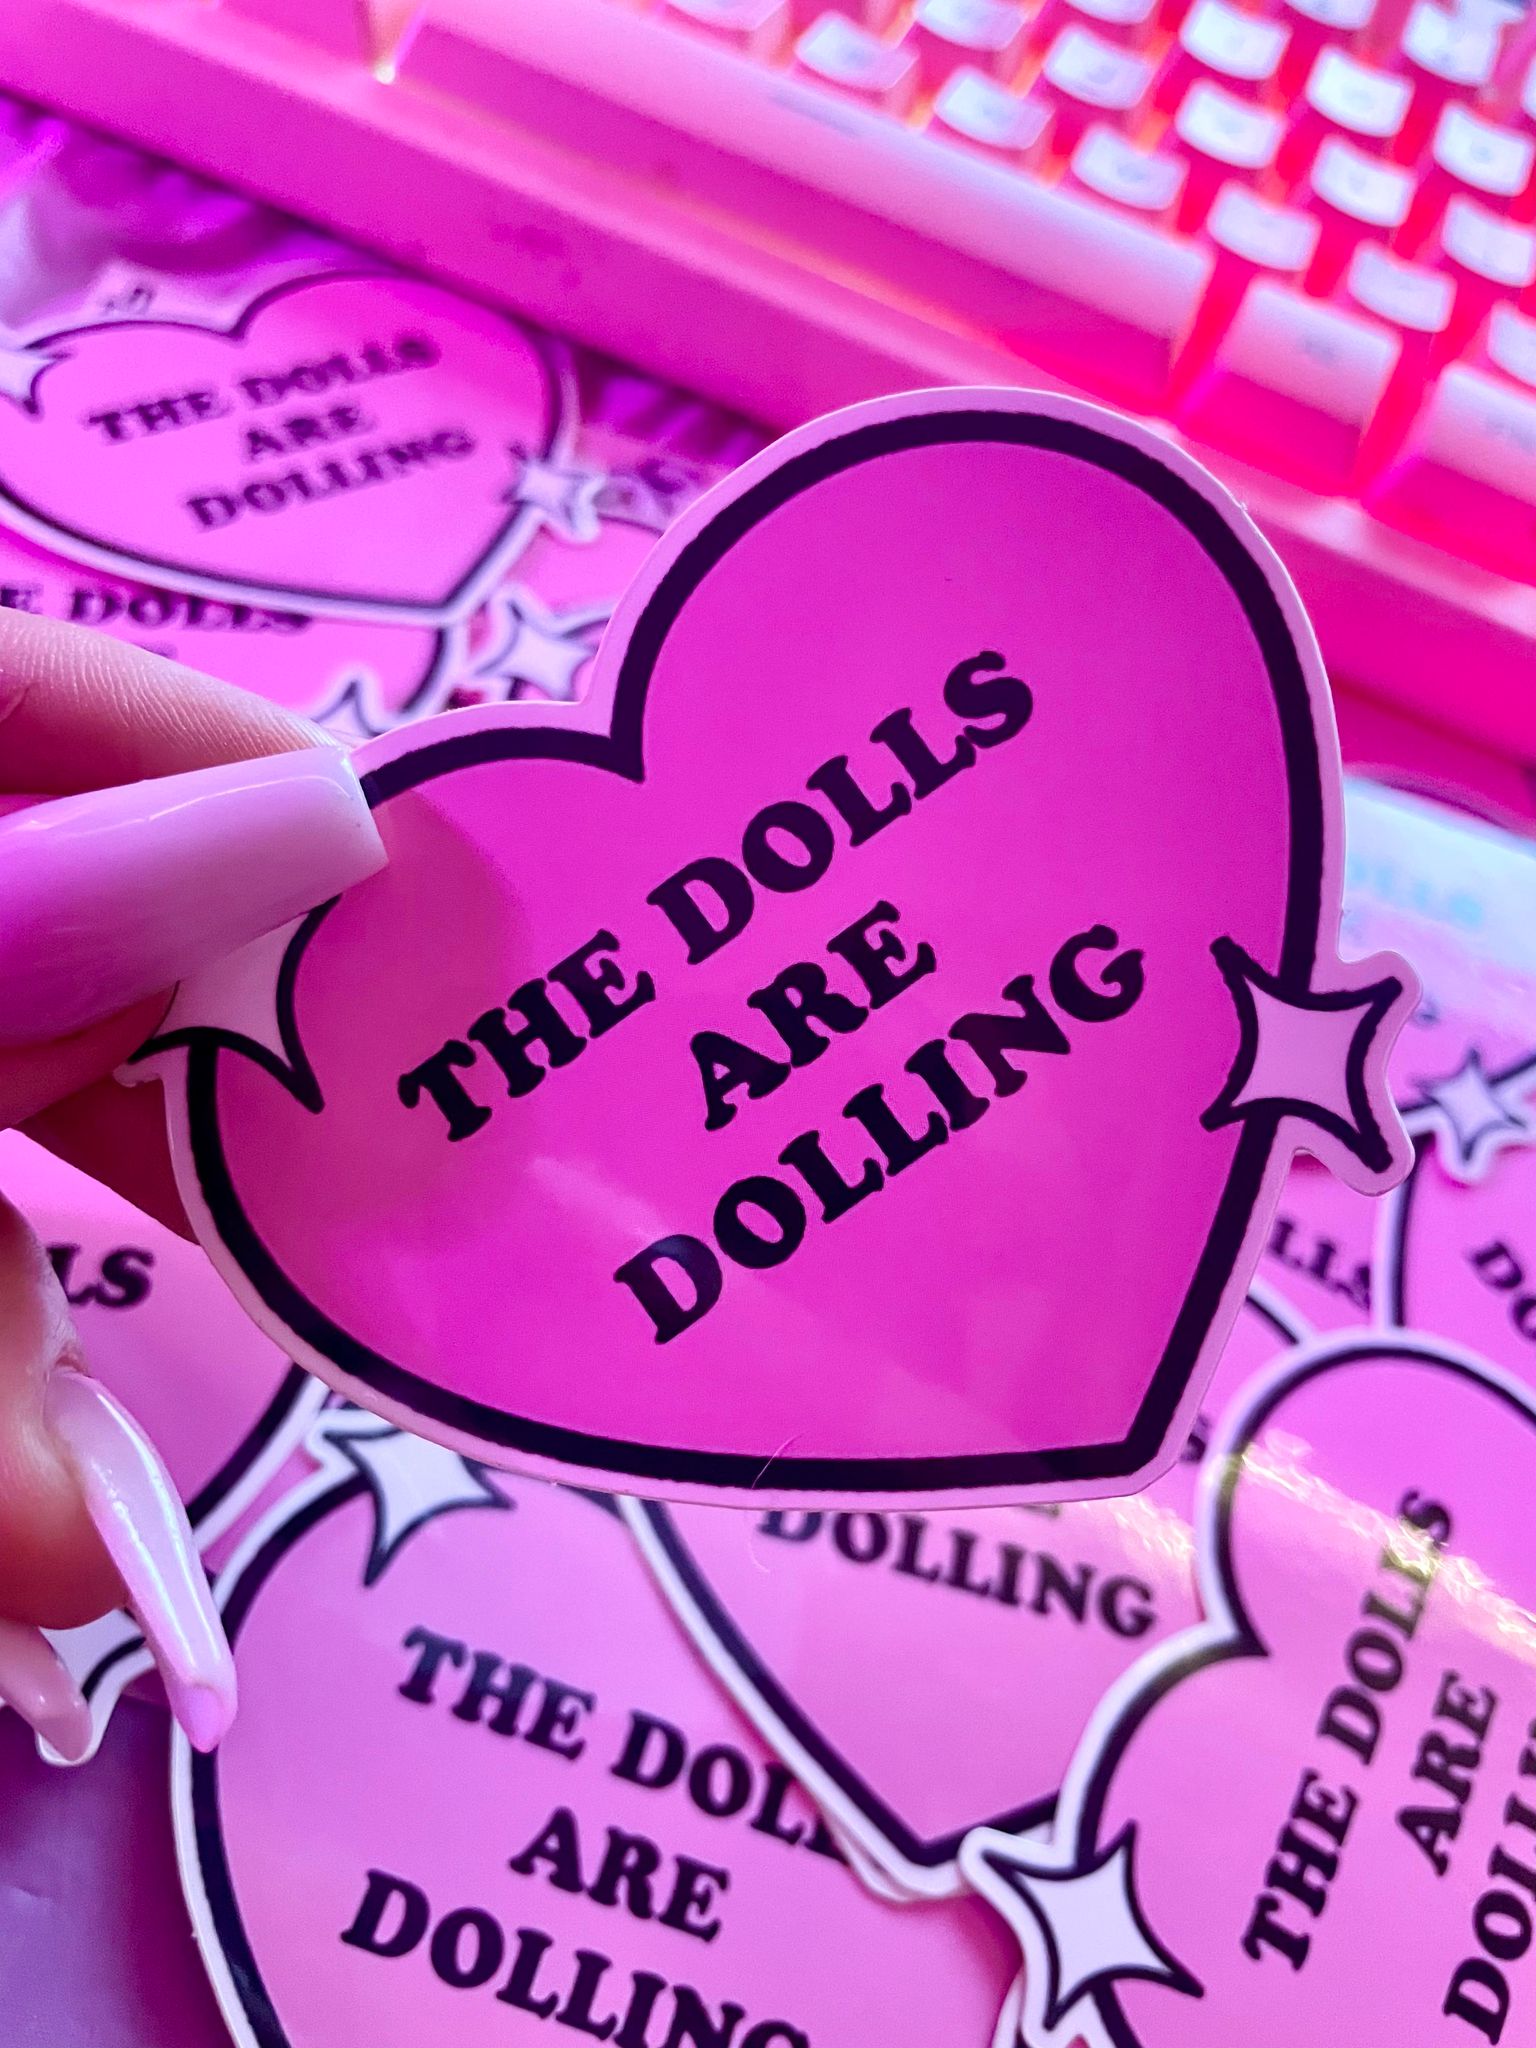 THE DOLLS ARE DOLLING STICKER